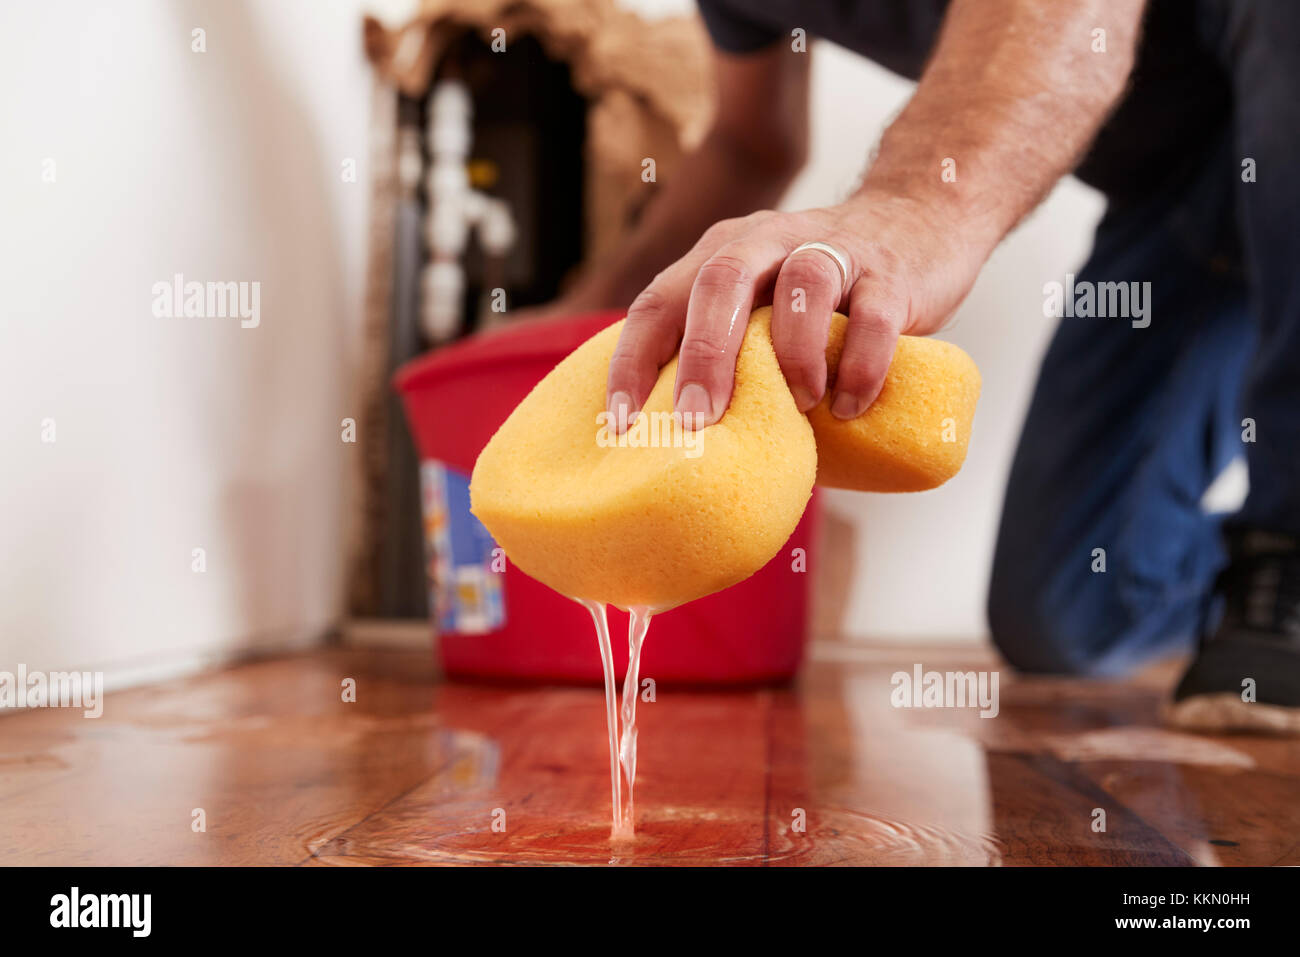 Man mopping up water from the floor with a sponge, detail Stock Photo